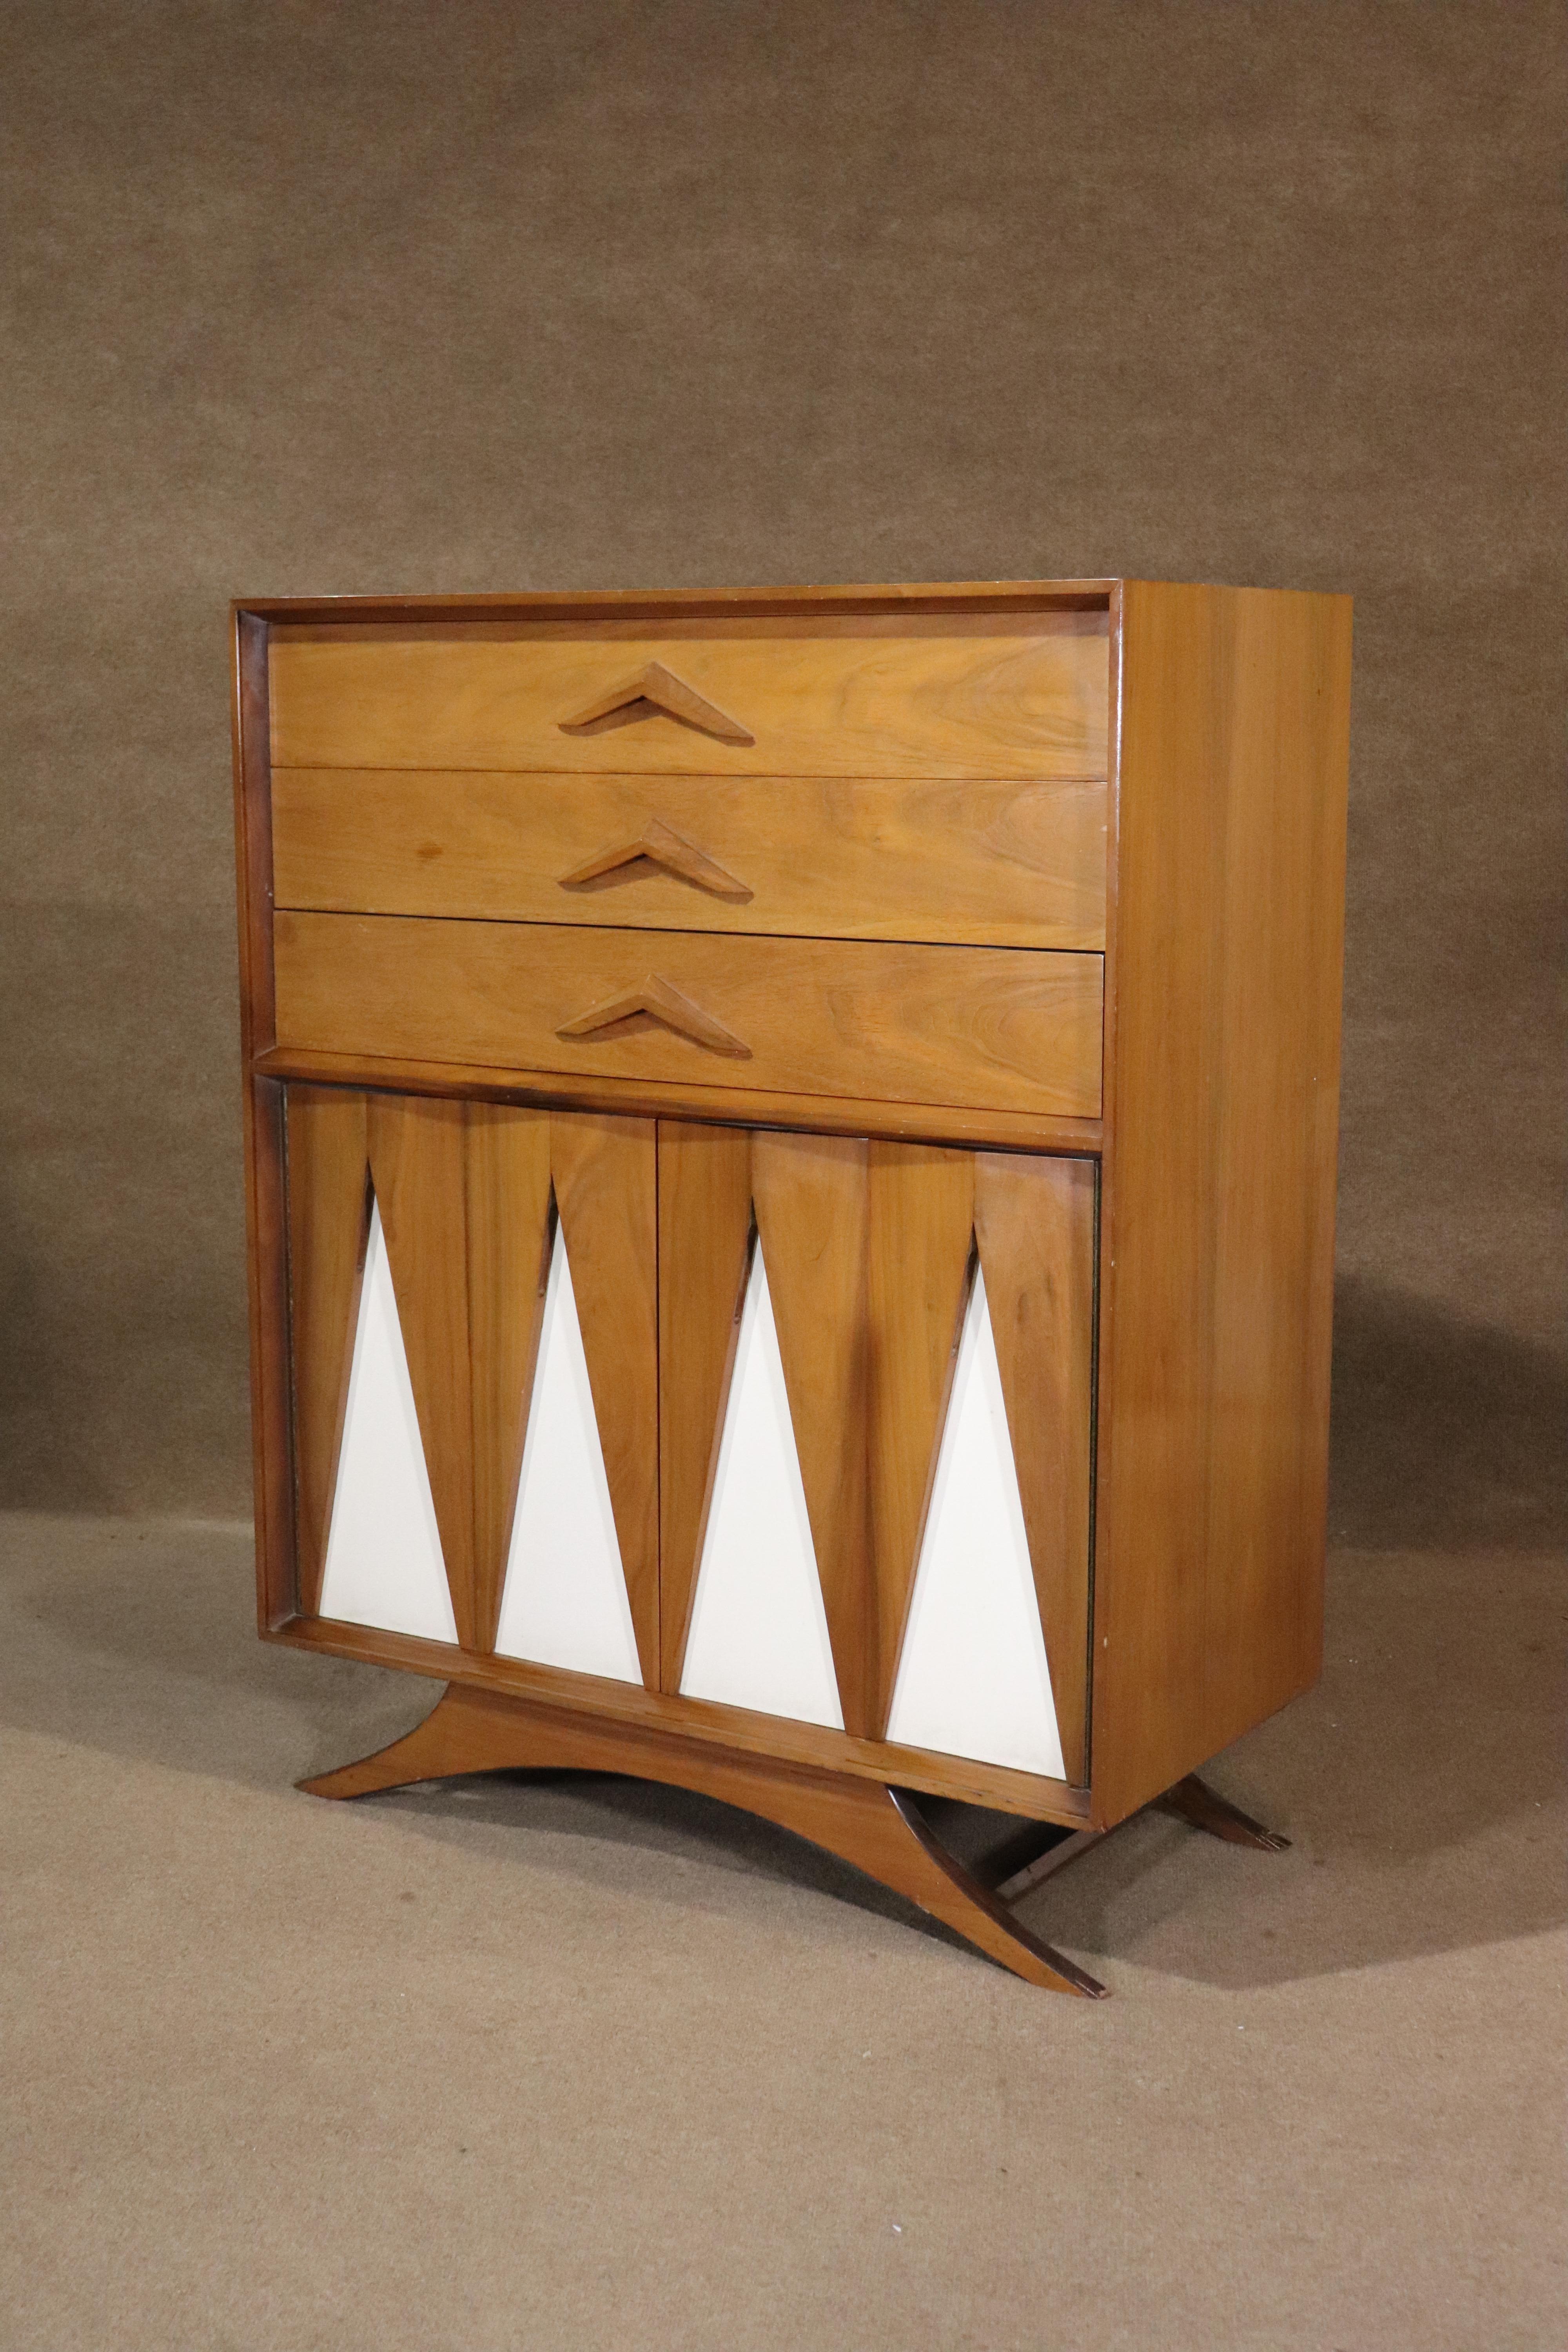 Unique vintage American dresser with white triangle cutouts and sculpted bottom. Six total drawers, wood handles and unusual front doors.
Please confirm location NY or NJ